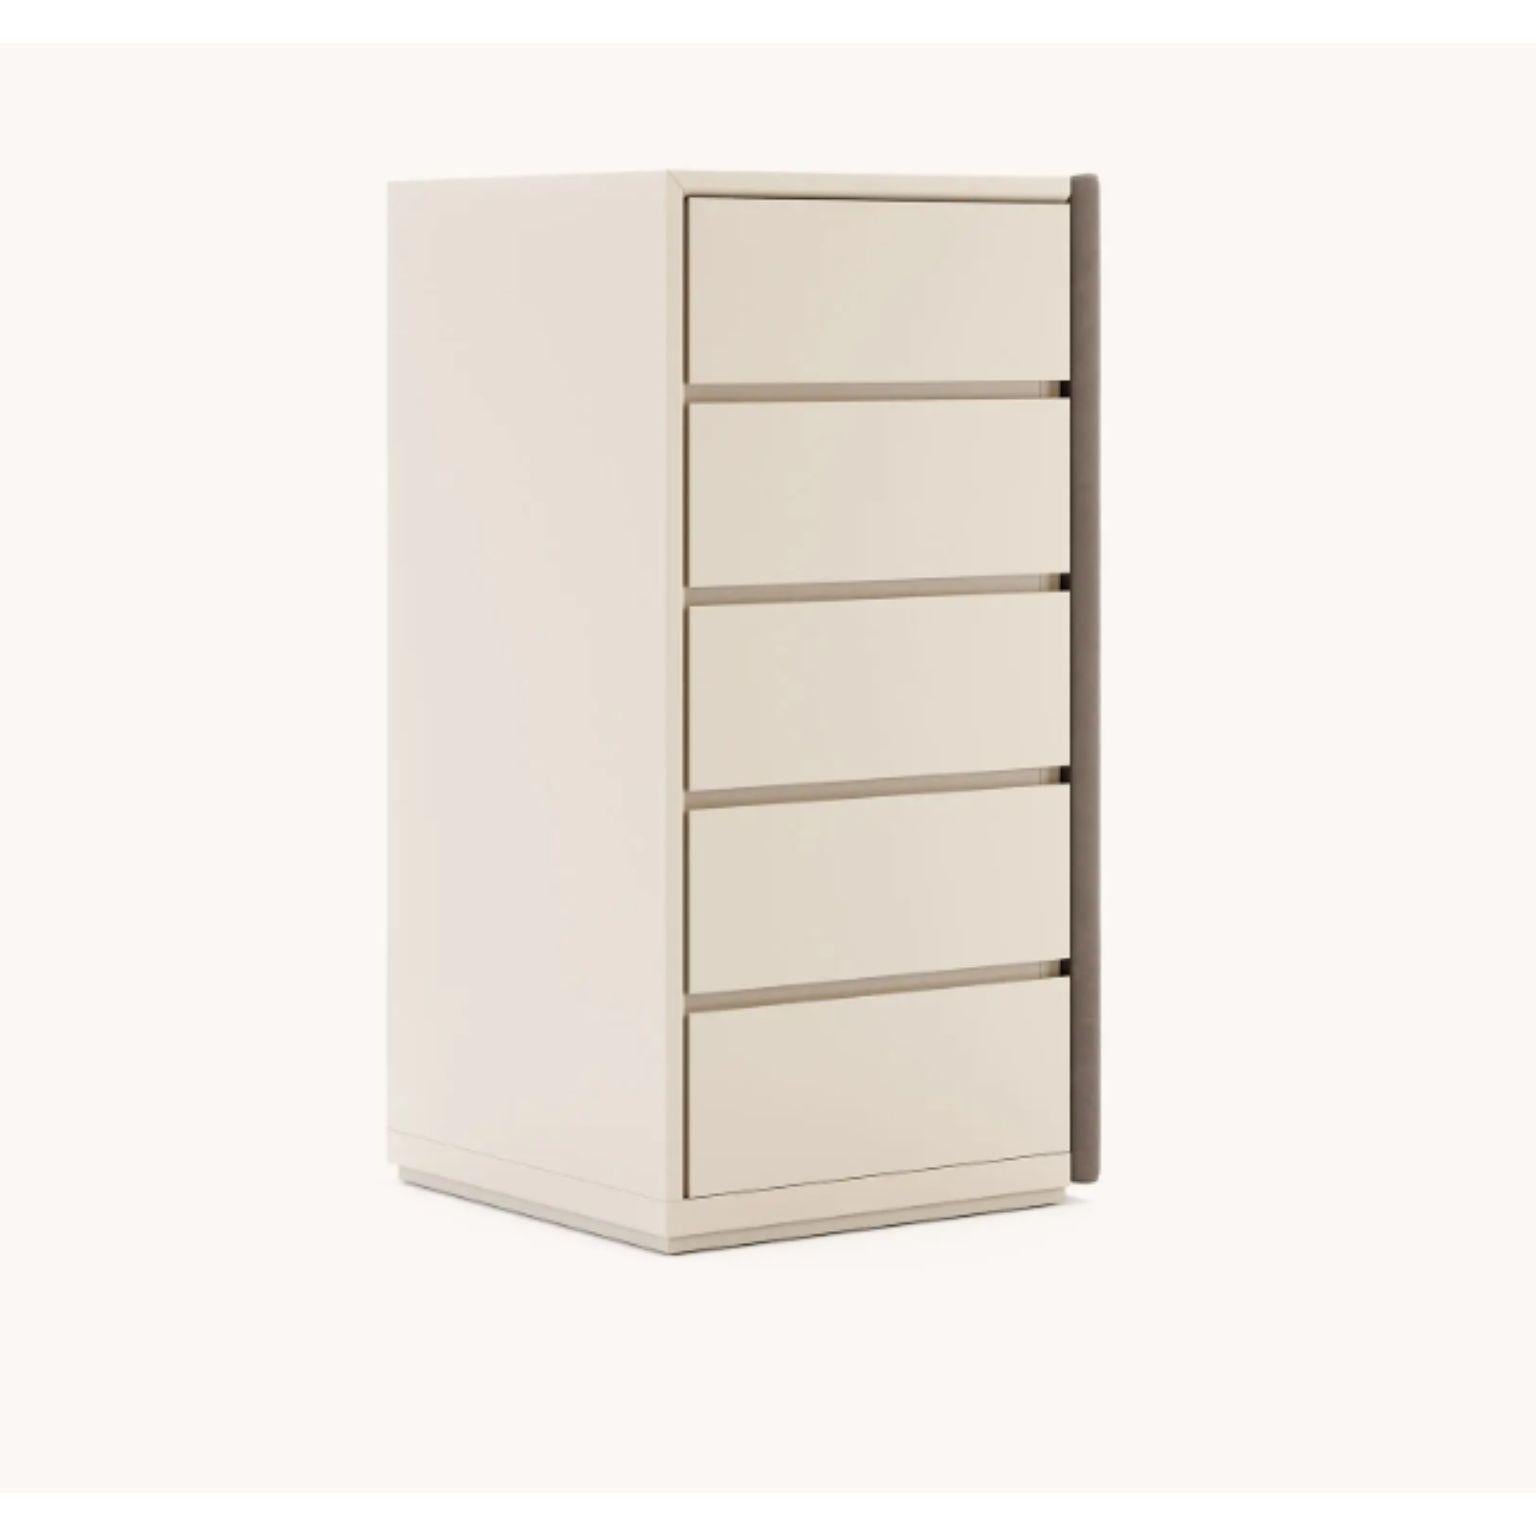 Taylor dresser with 5 drawers by Domkapa
Dimensions: W 61 x D 60 x H 120 cm.
Materials: Moka lacquered matte, microfiber (Tarn 05).
Also available in different materials.

Taylor is a set of three-bedroom furniture pieces for cozy decor.